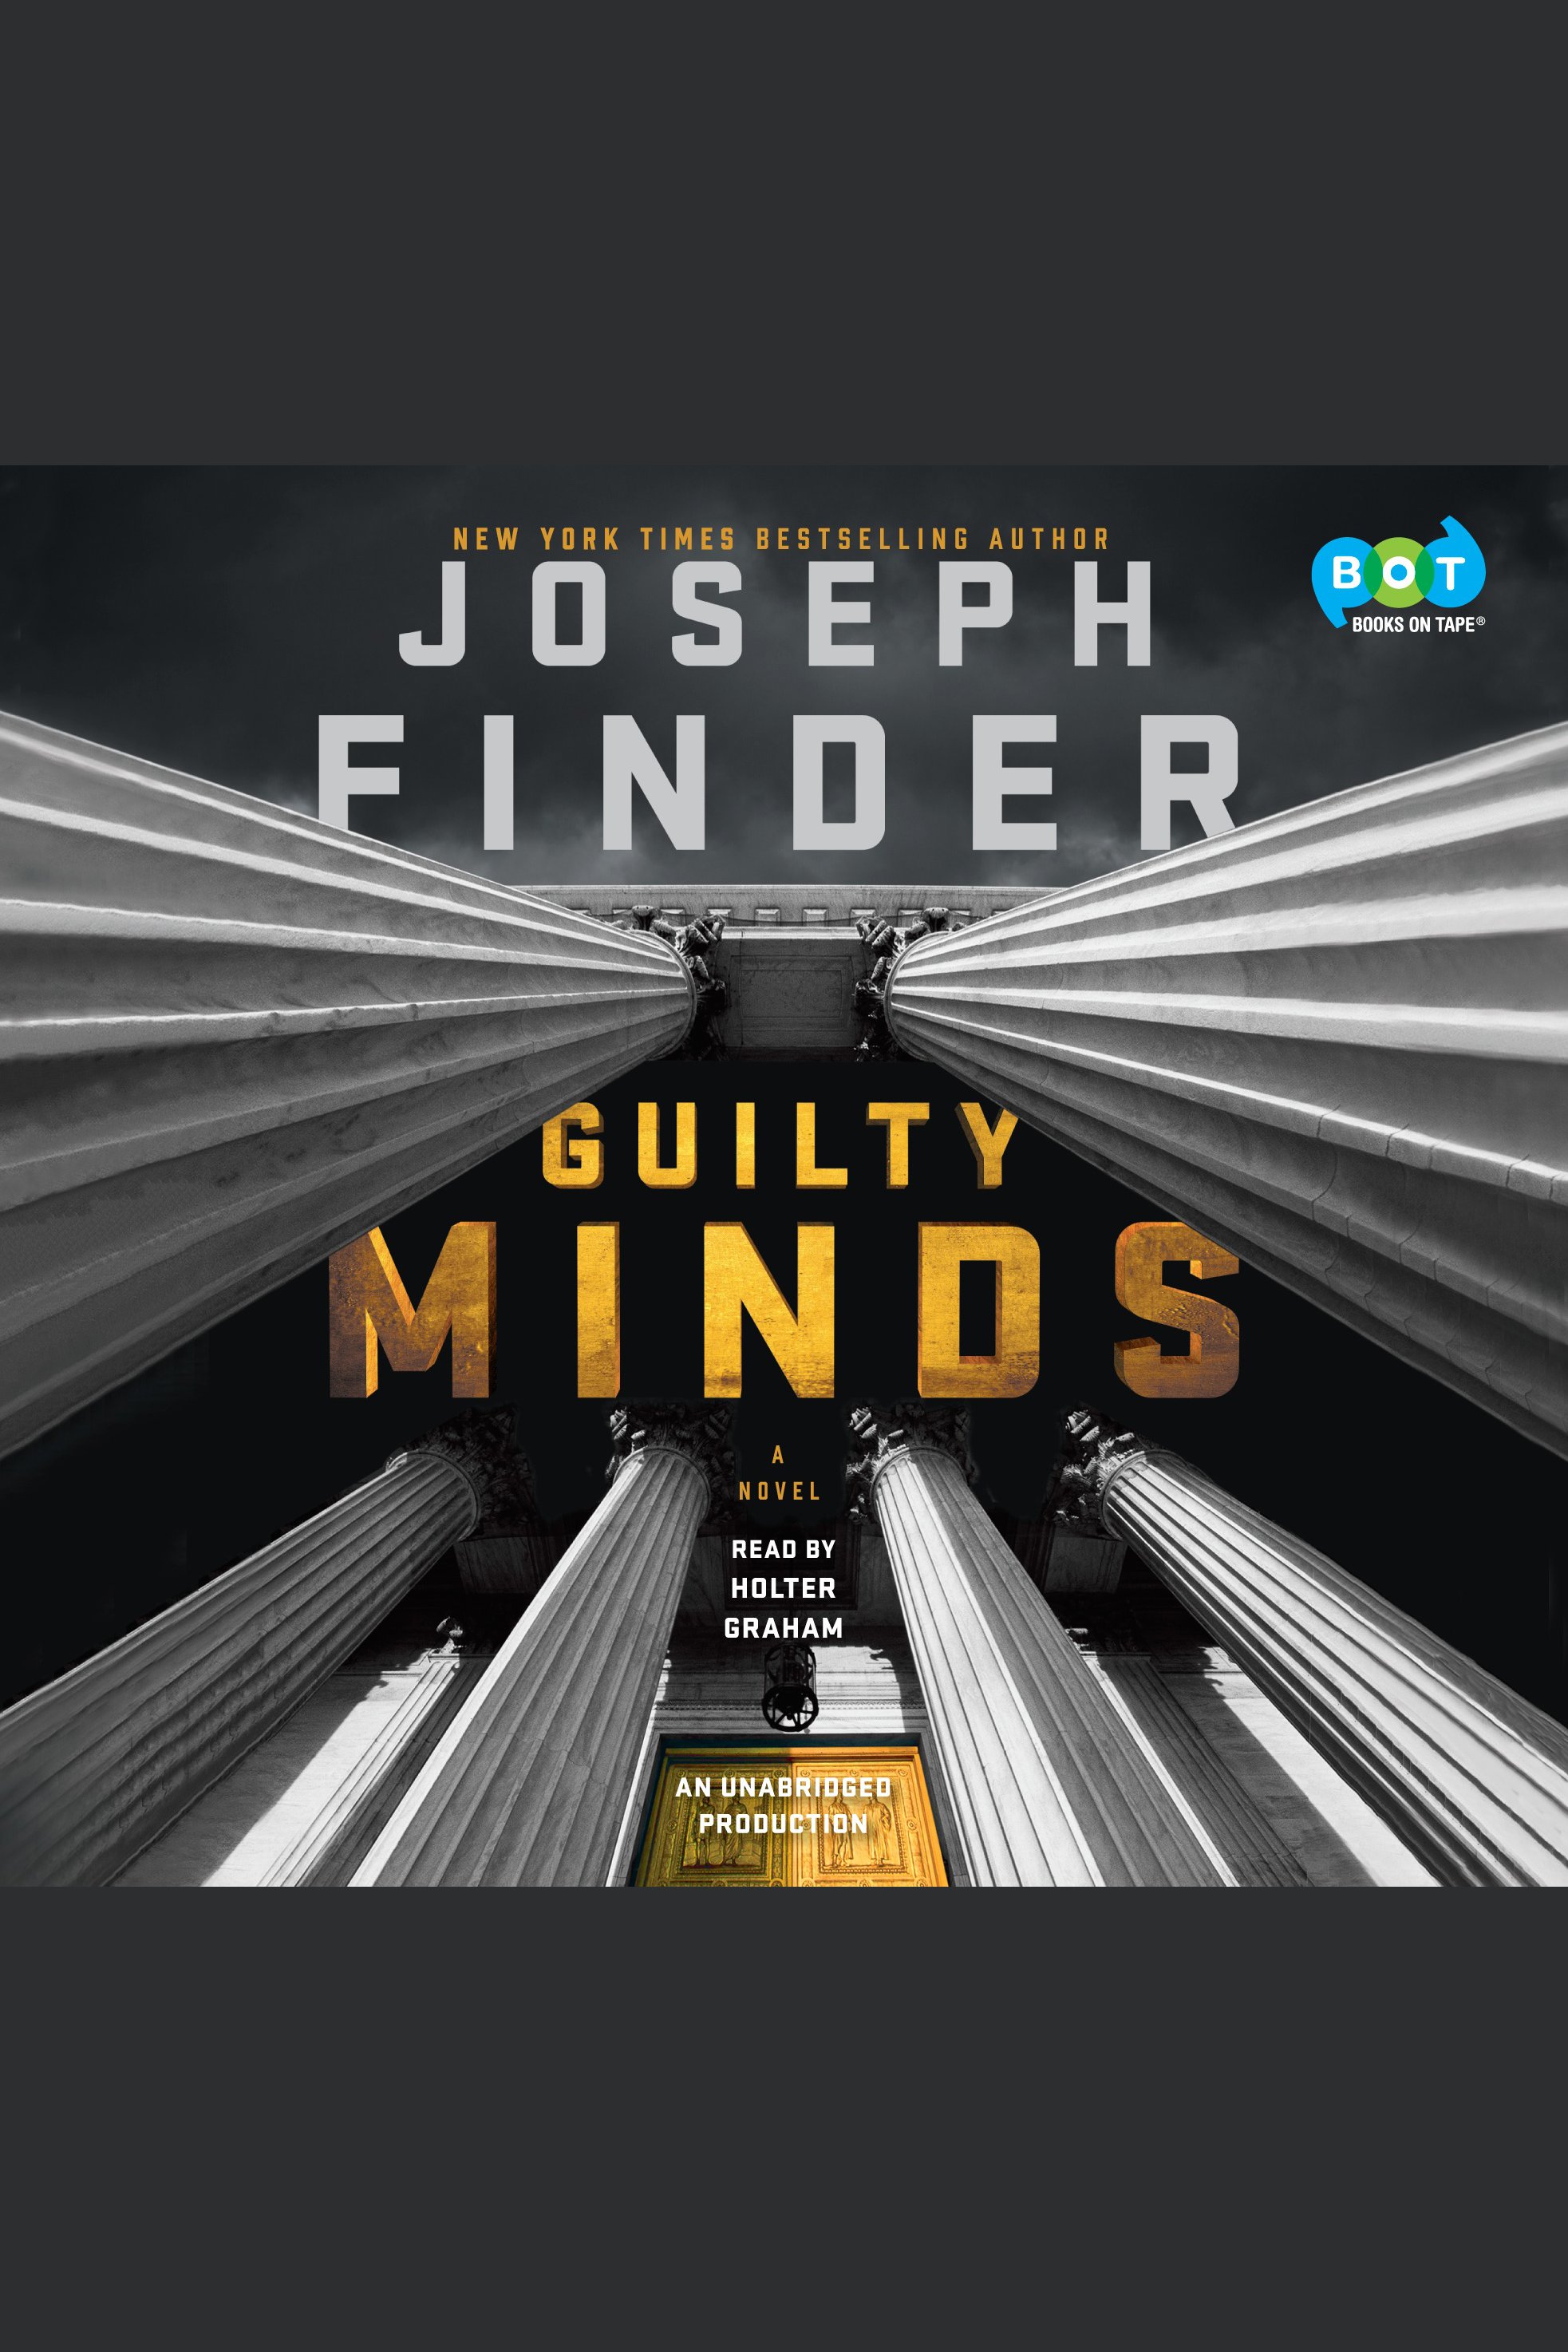 Guilty minds cover image